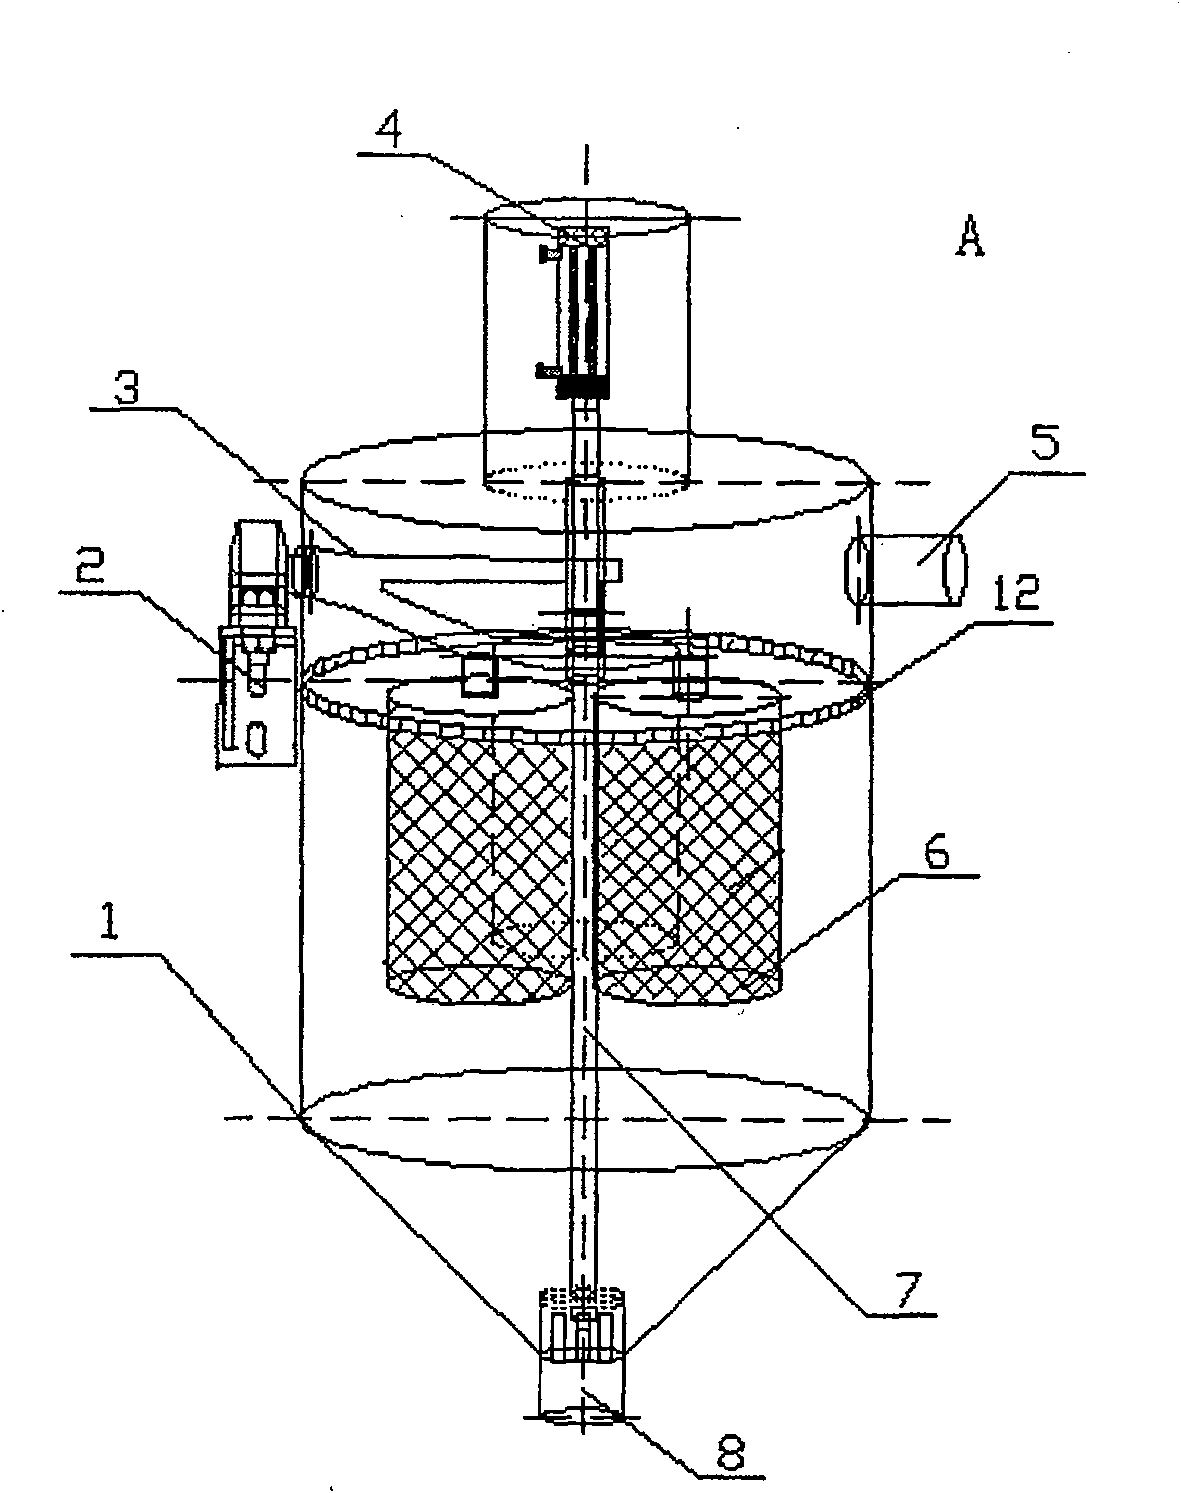 Fume emission on-line continuous detecting system sampling apparatus